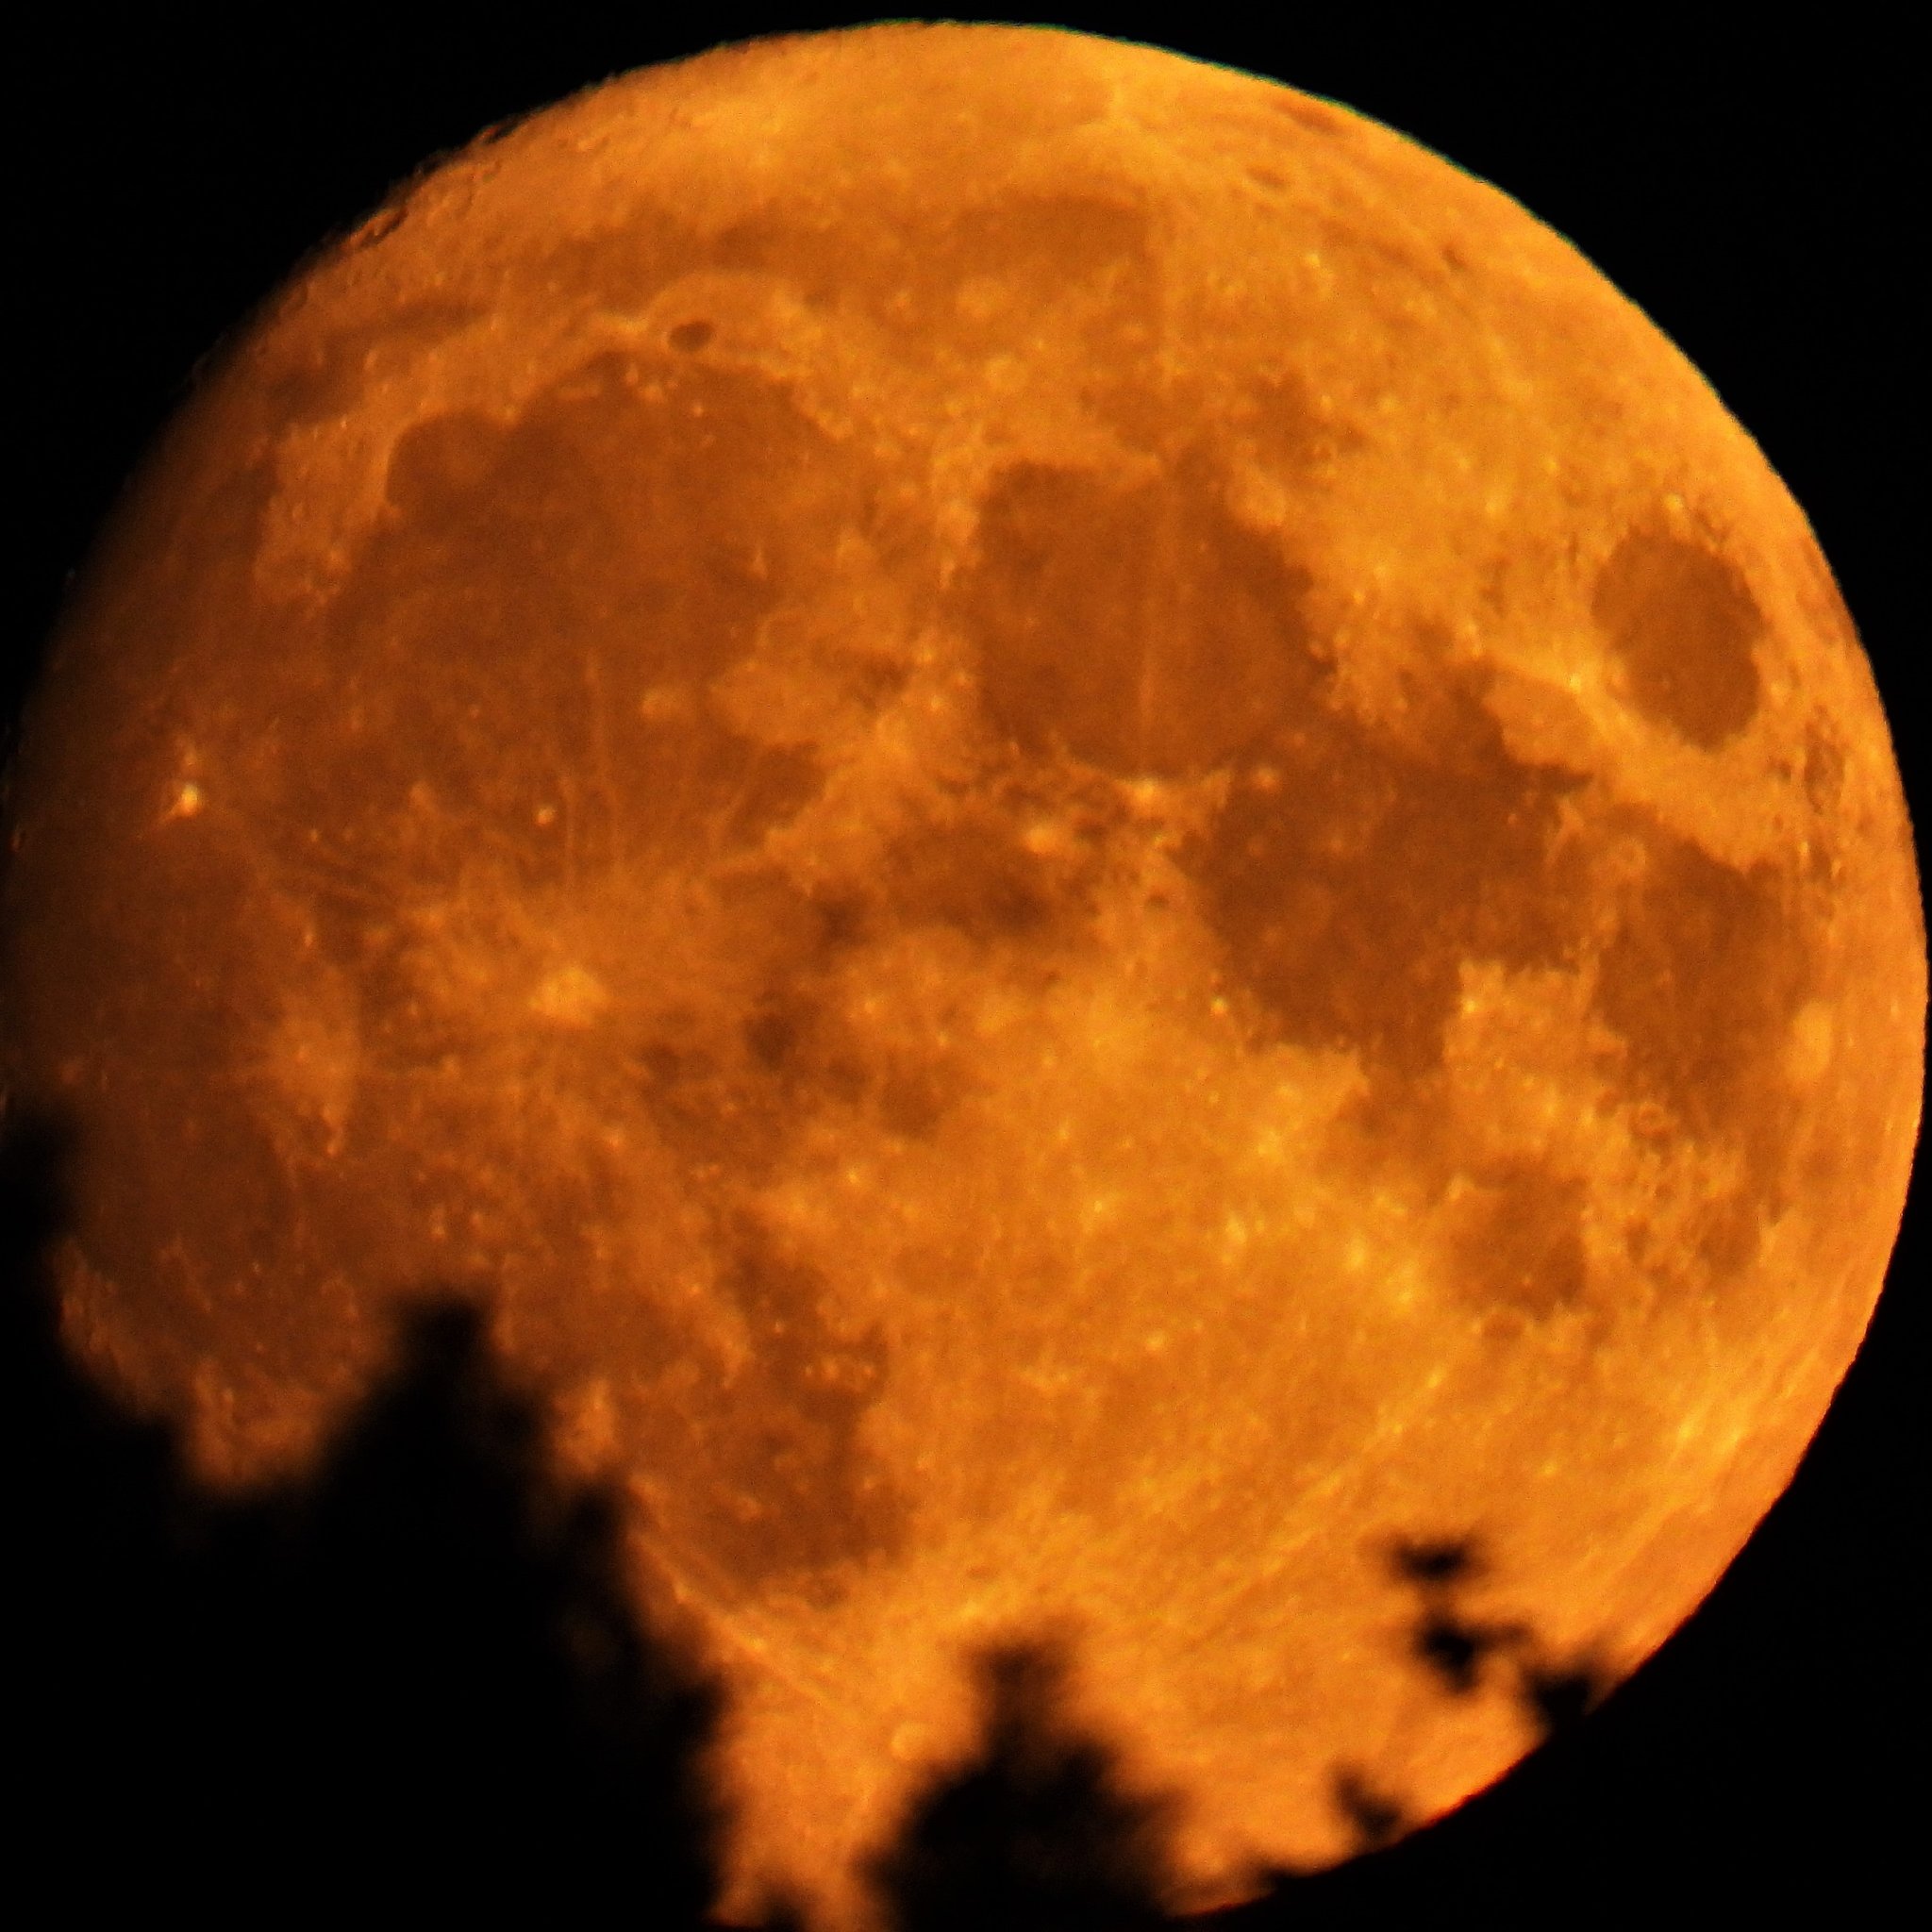 The super blue moon will be visible next week